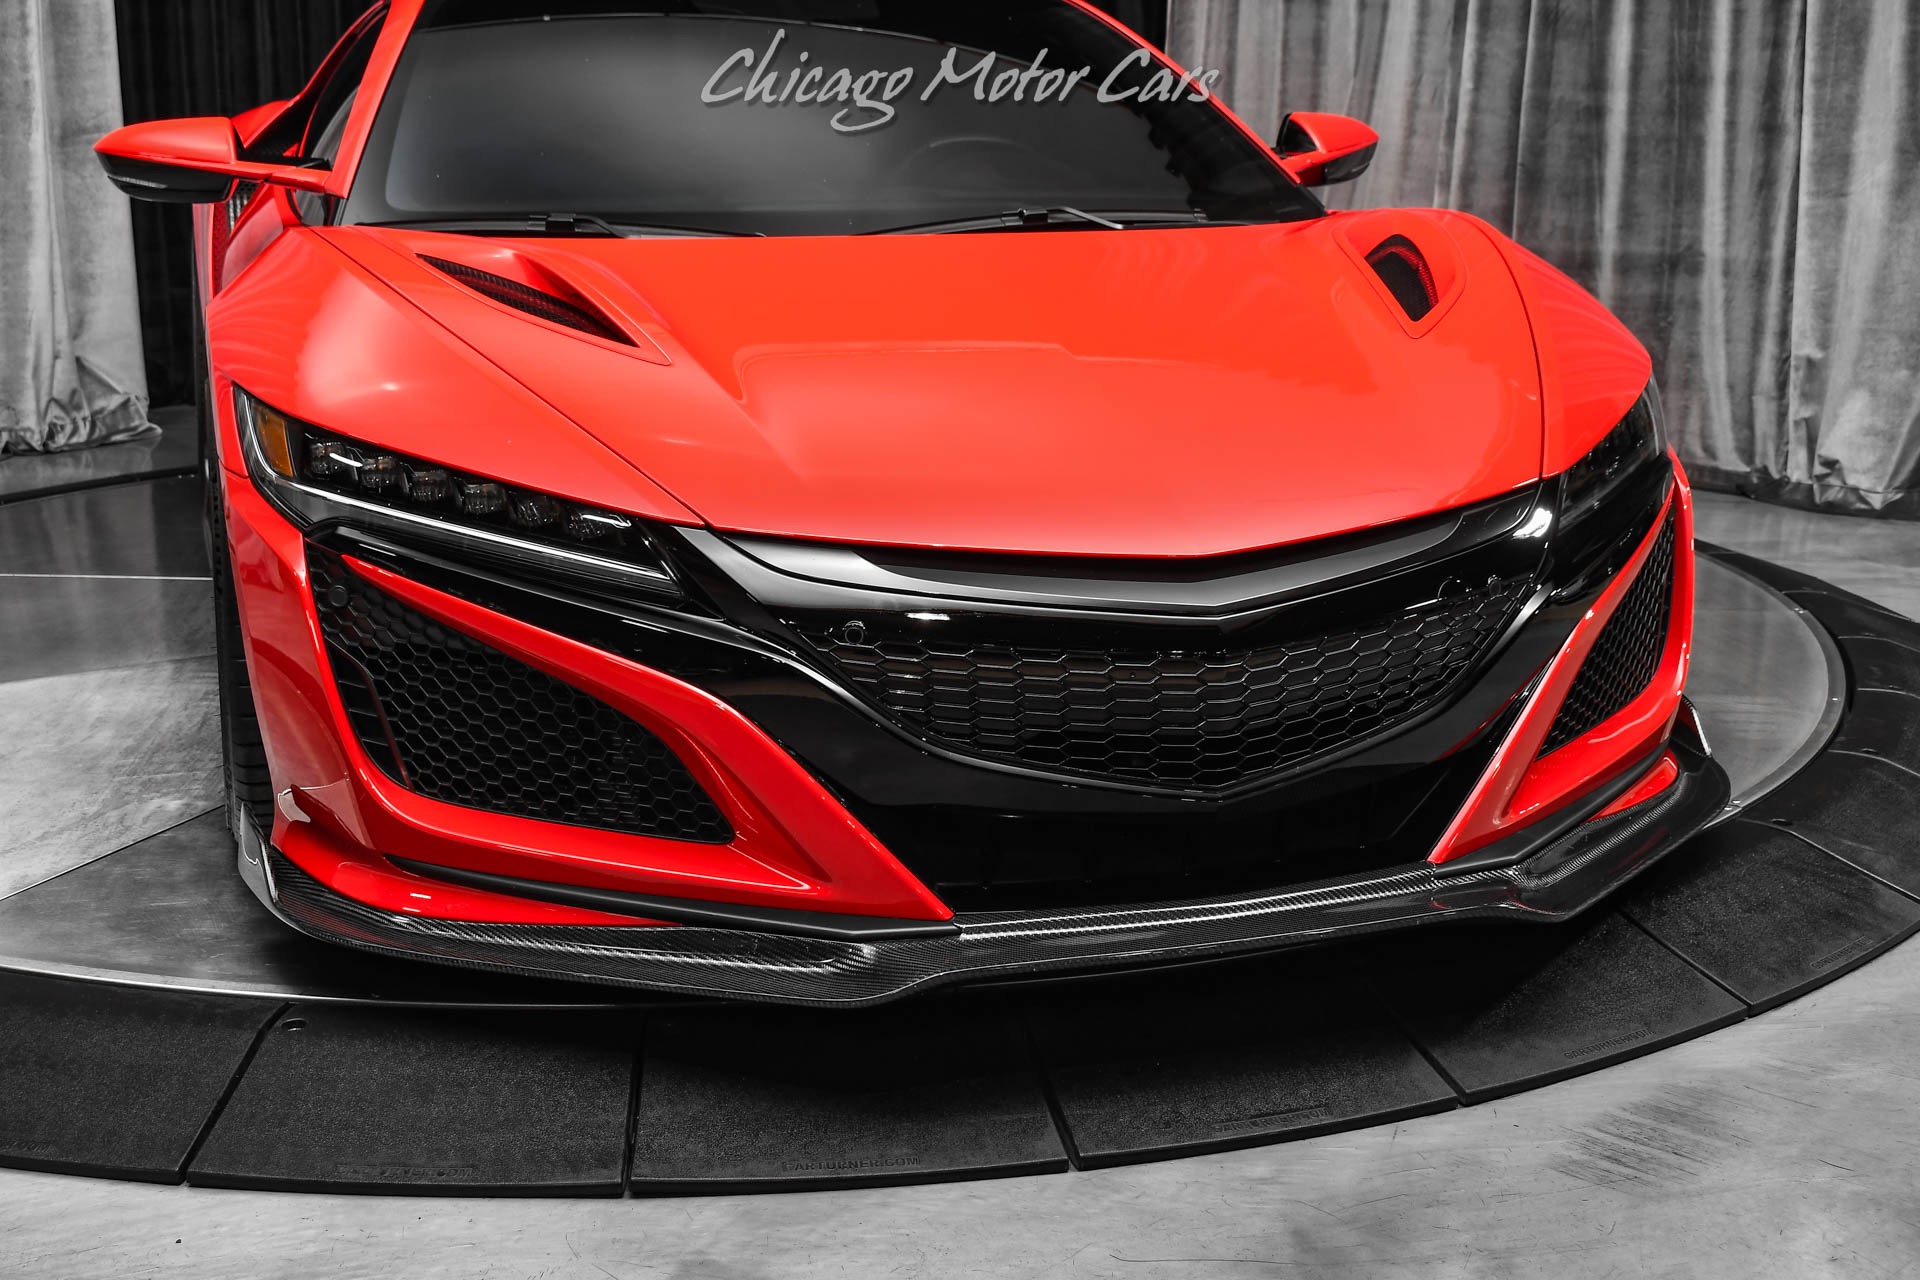 Used-2017-Acura-NSX-SH-AWD-Sport-Hybrid-Coupe-10k-miles-Tons-of-Carbon-Fiber-Anrky-Wheels